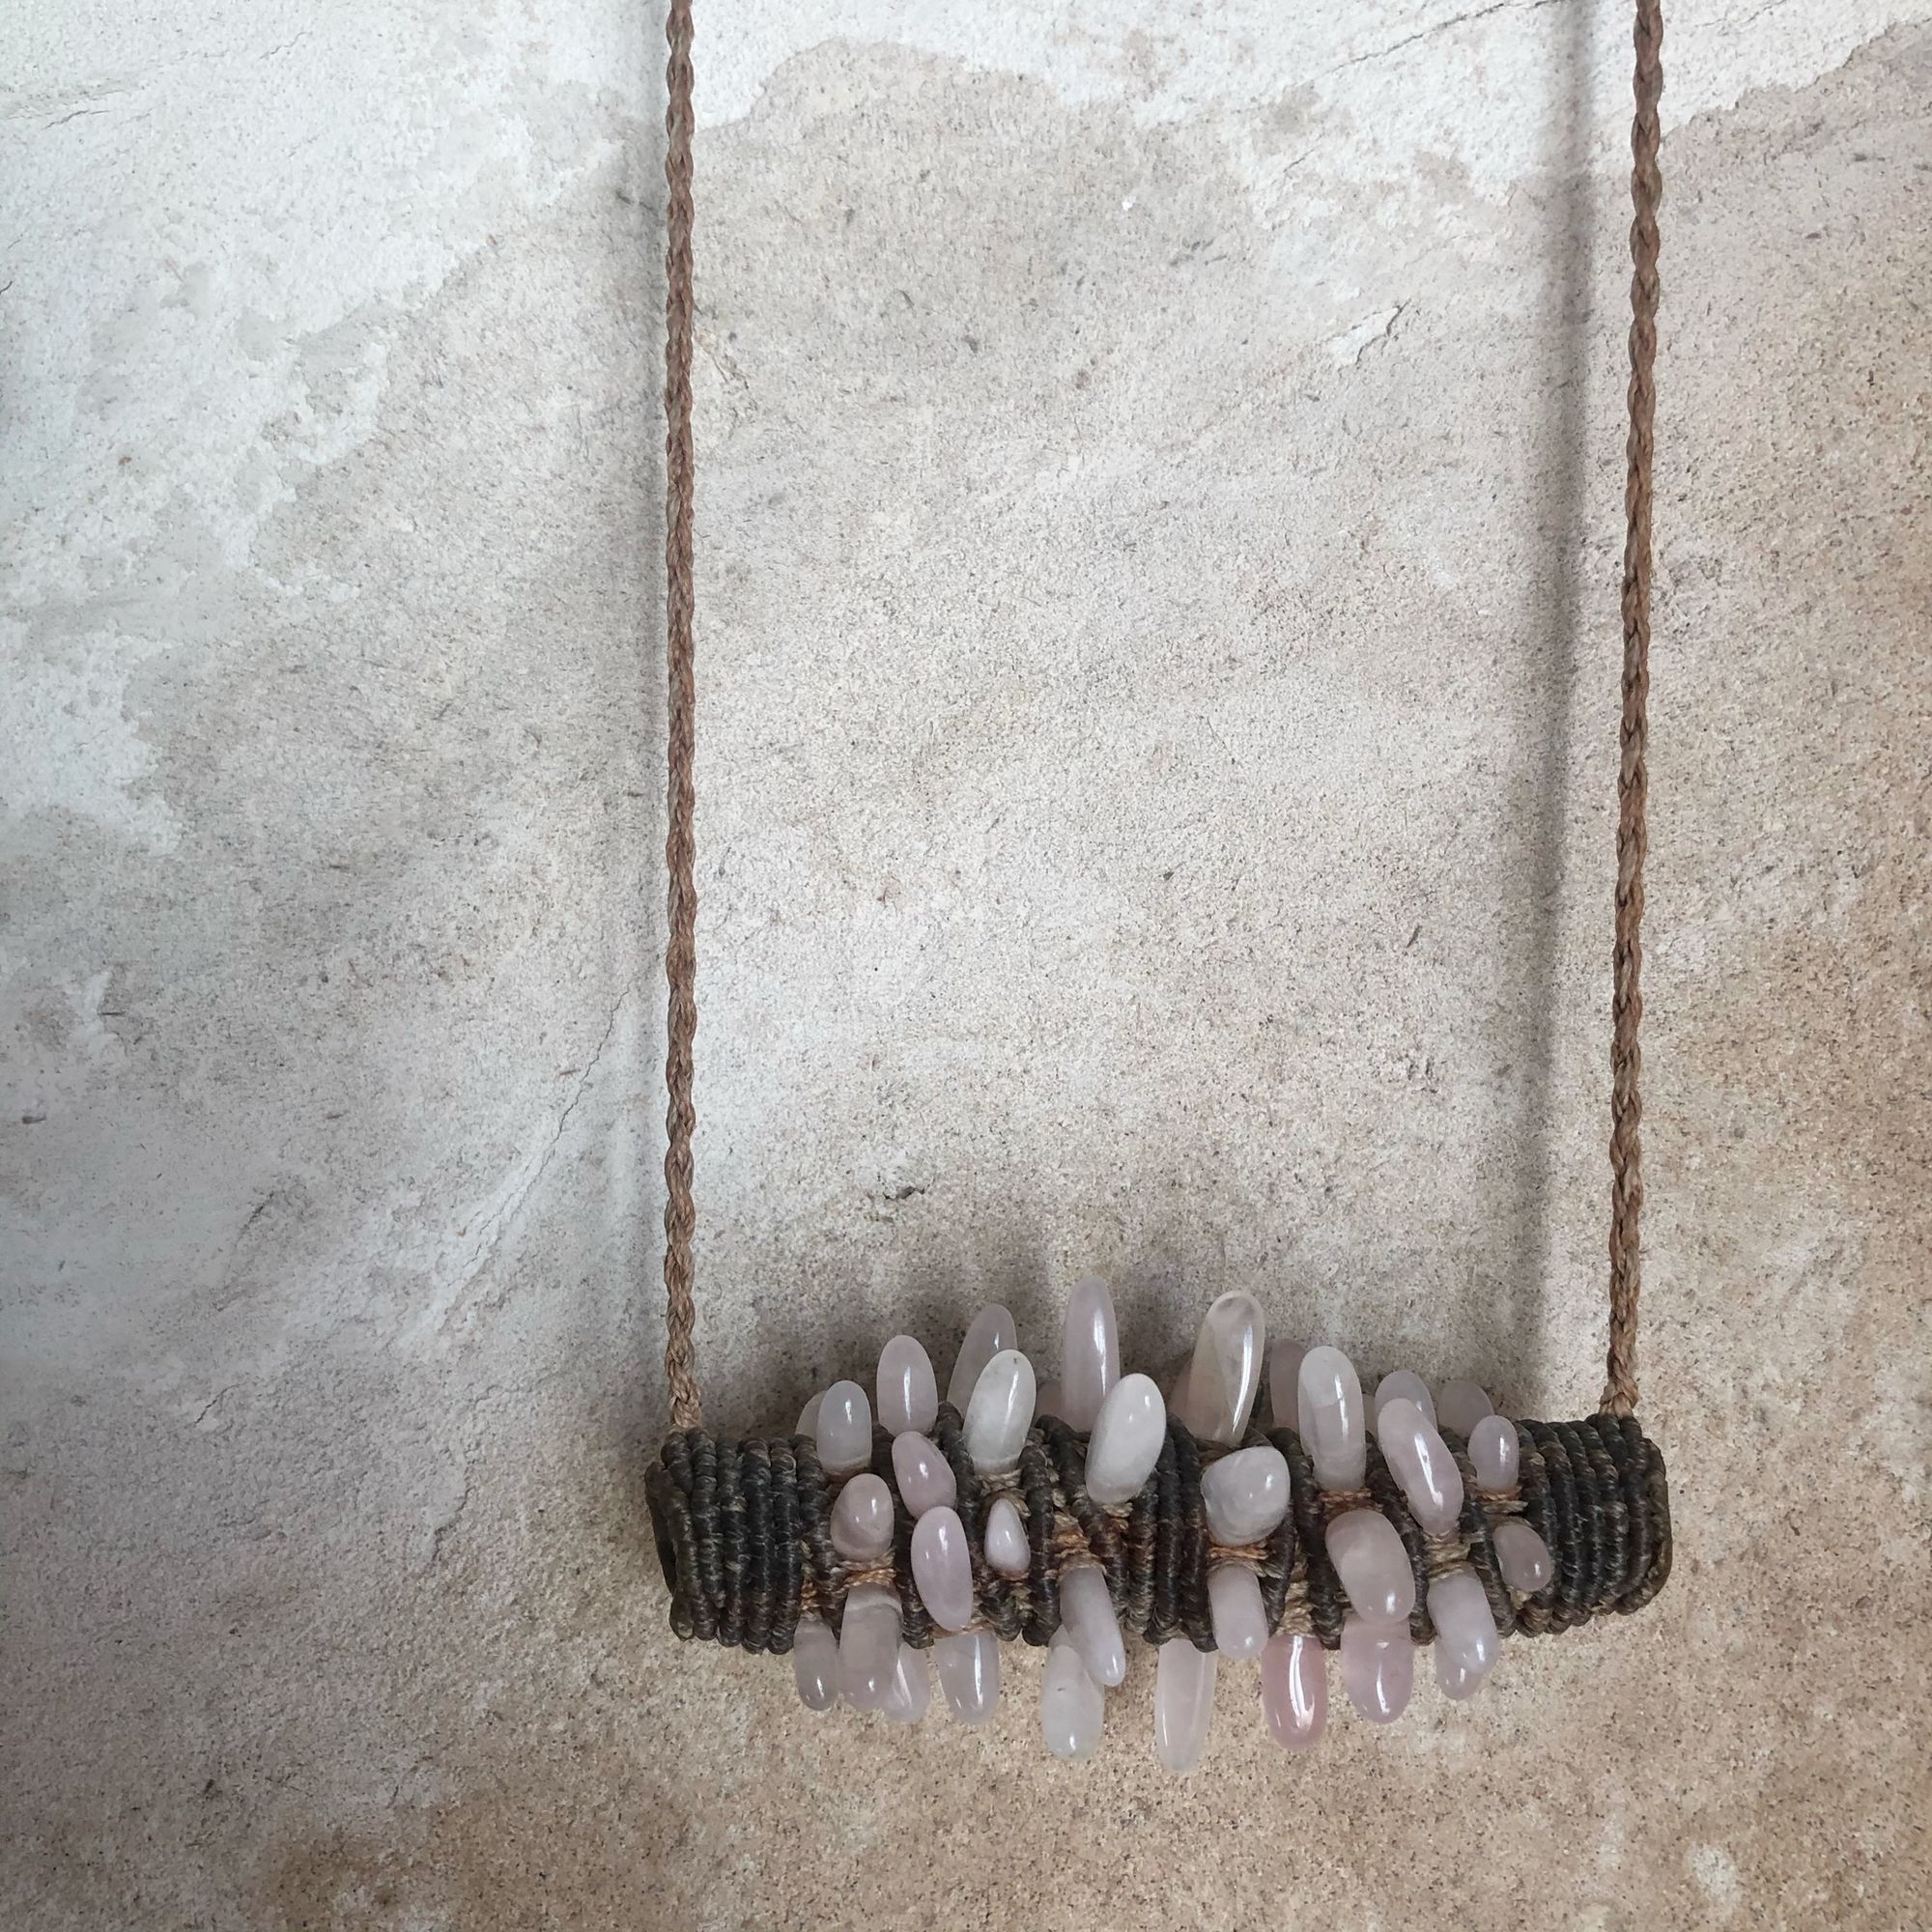 Freeform knot work tube necklace with rose quartz spears protruding from it 